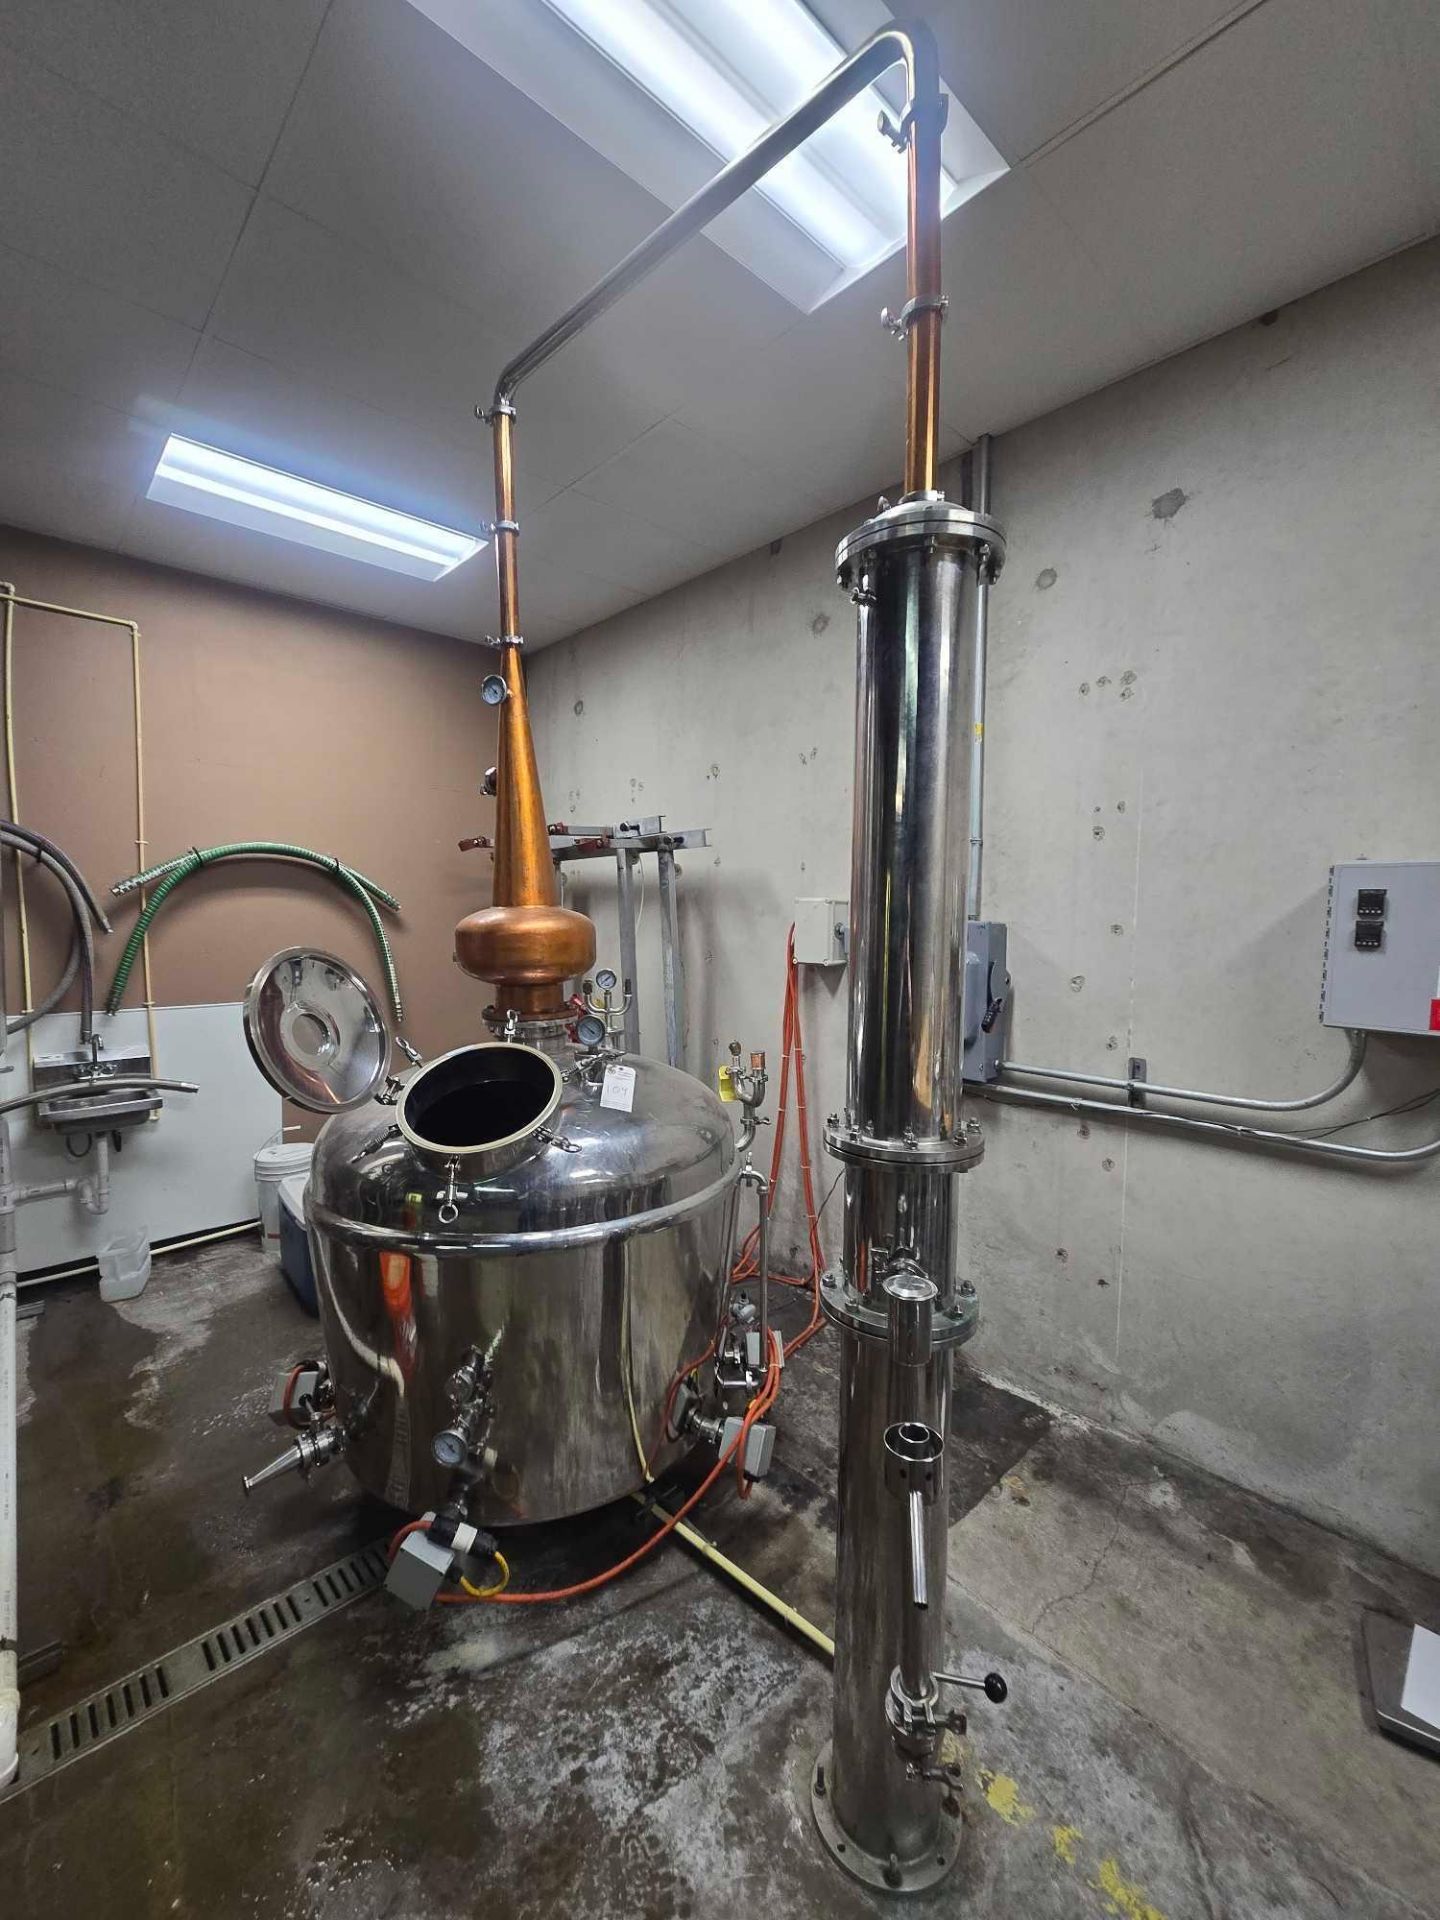 STAINLESS STEEL ELECTRIC POT STILL W/ COPPER ALEMBIC & CONDENSER APPROX. 300 GALLONS